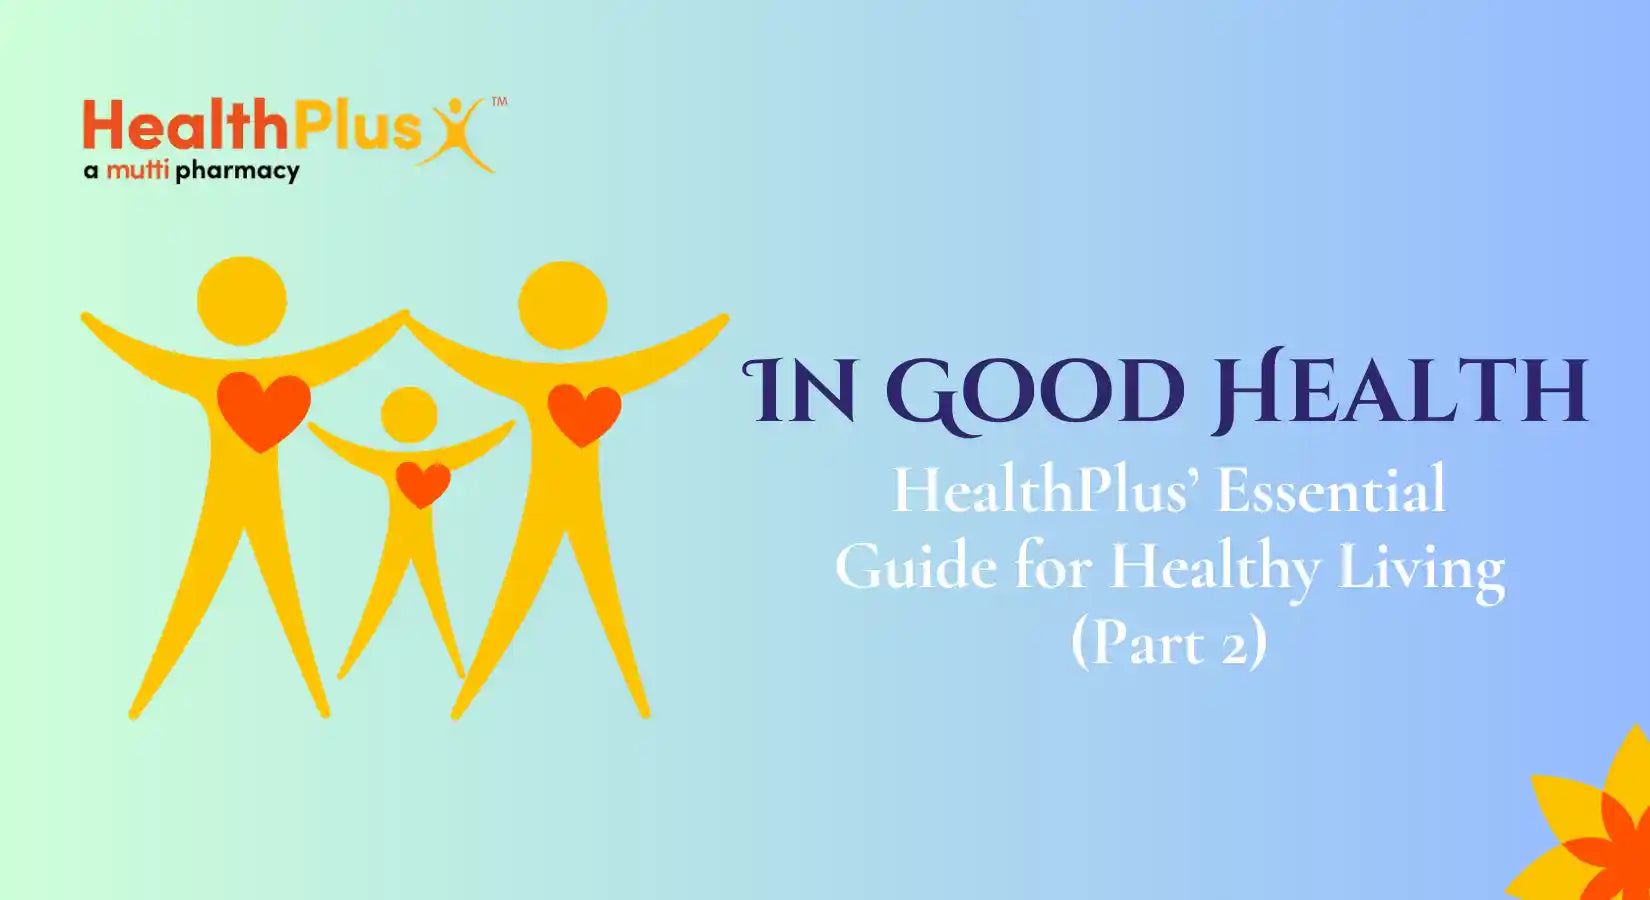 In Good Health: HealthPlus’ Essential Guide for Healthy Living (Part 2)